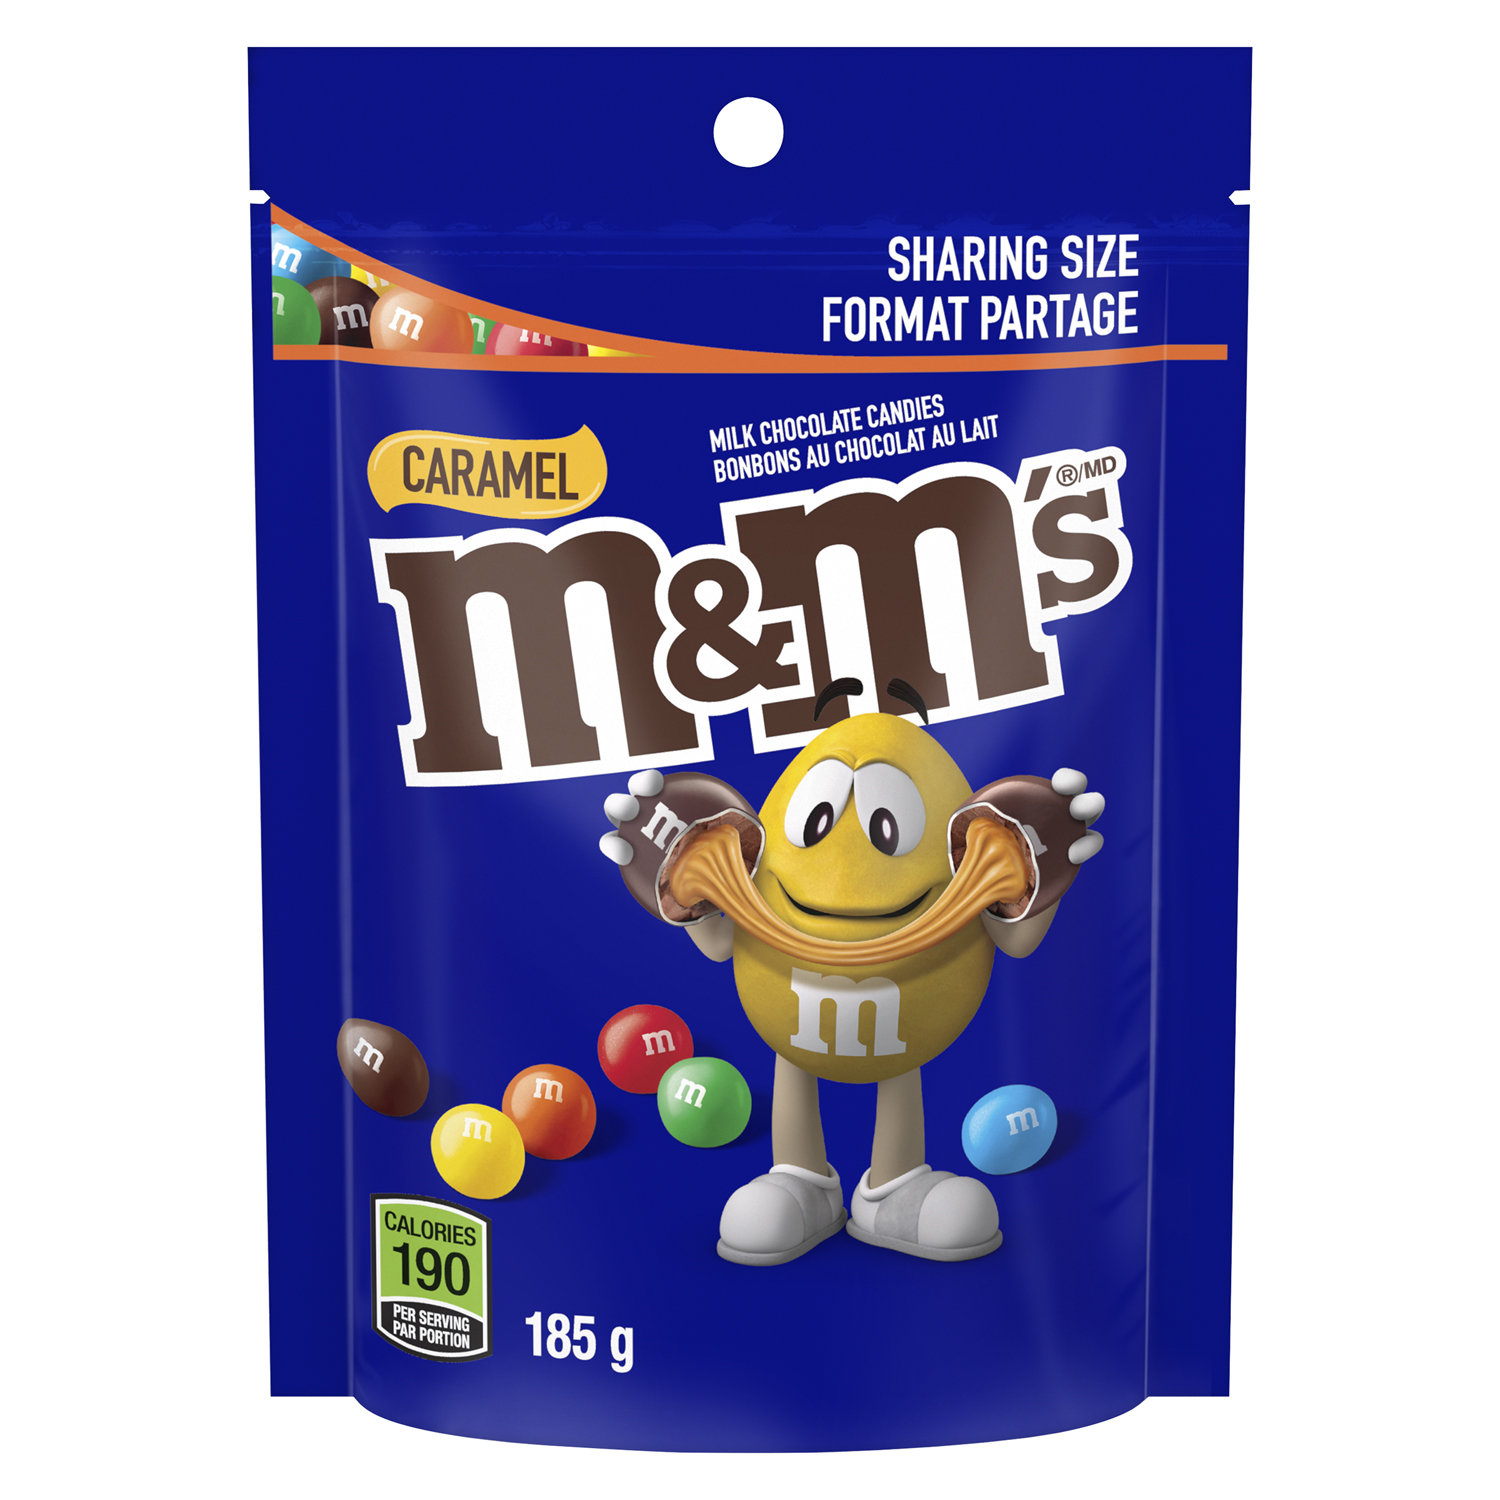 Save on M&M's Chocolate Candies Milk Chocolate Red White & Blue Mix Sharing  Size Order Online Delivery